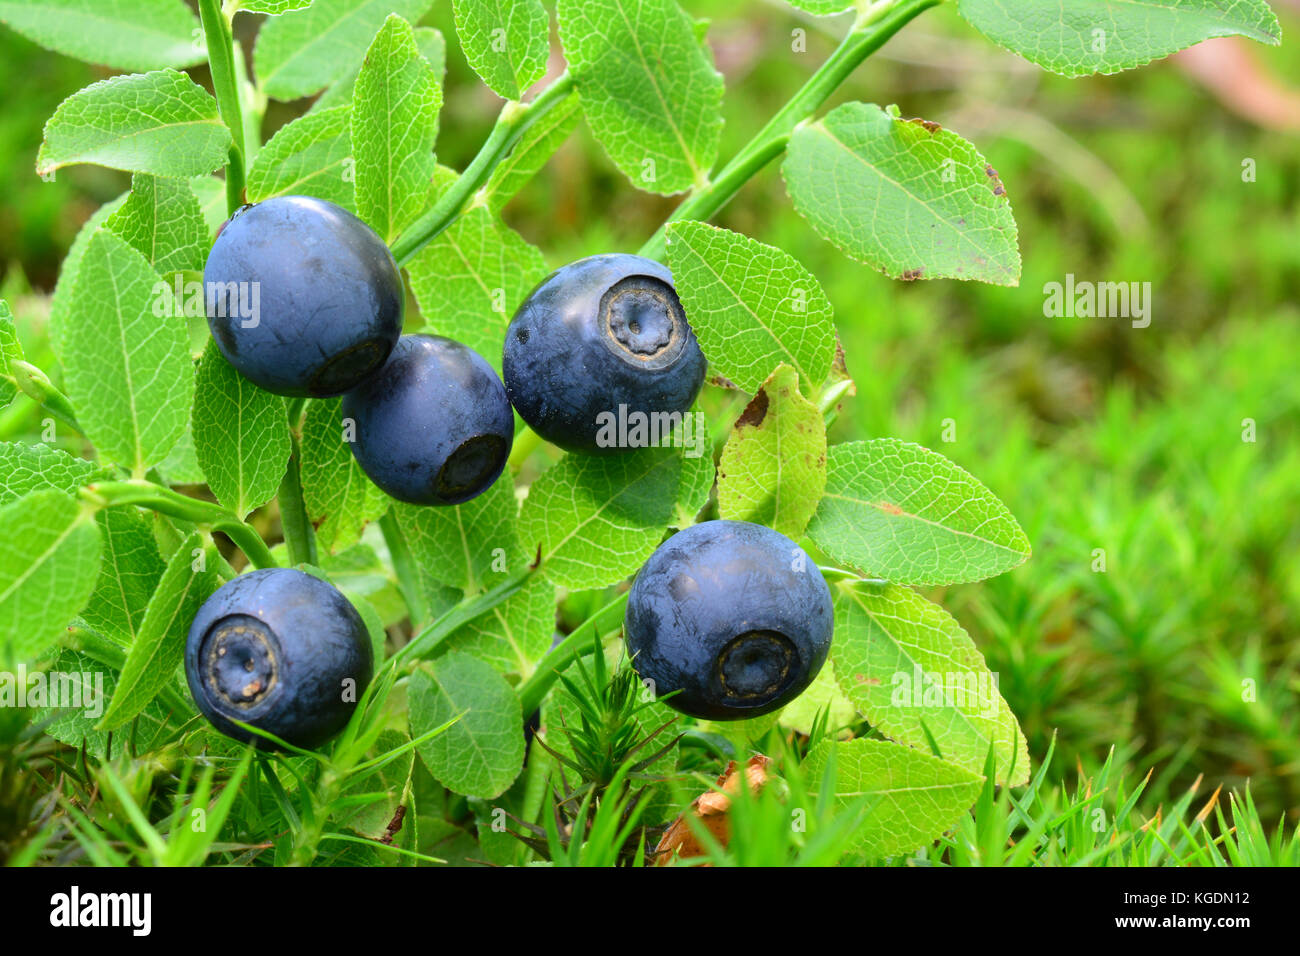 Ripe, fresh wild blueberries in natural habitat, side view, close up Stock Photo